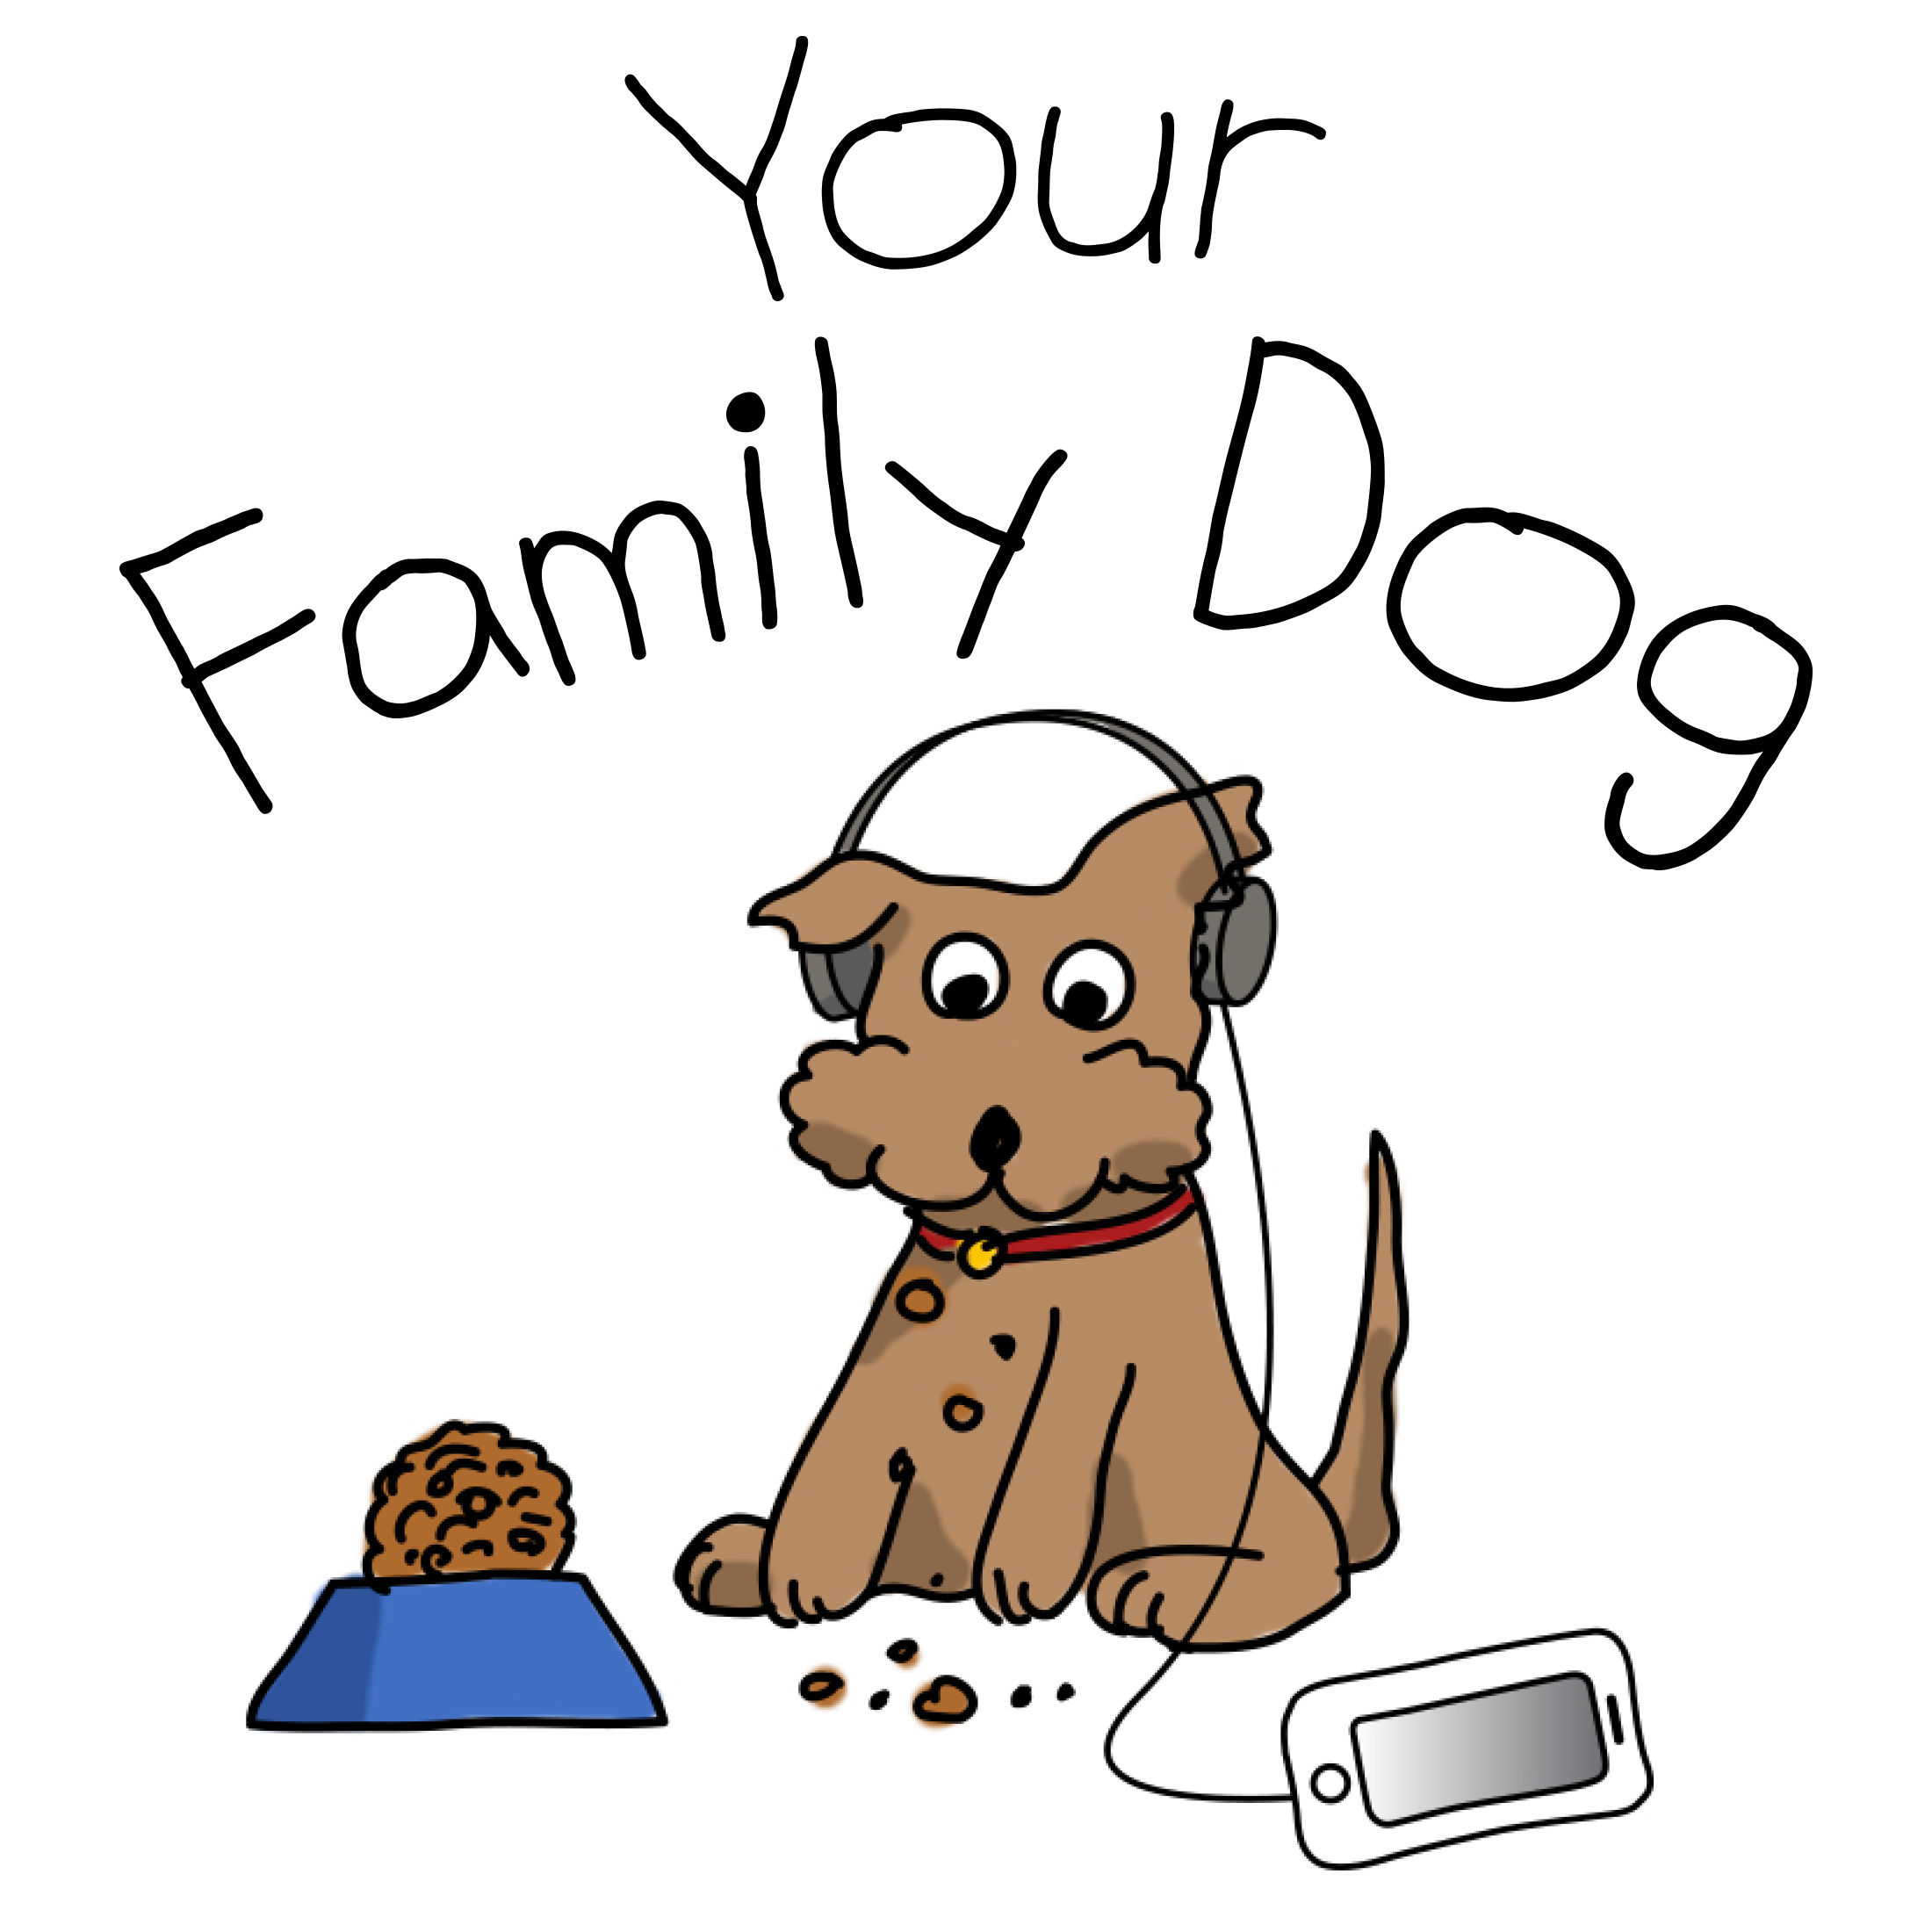 YFD 012: Simple Games for Kids and Dogs